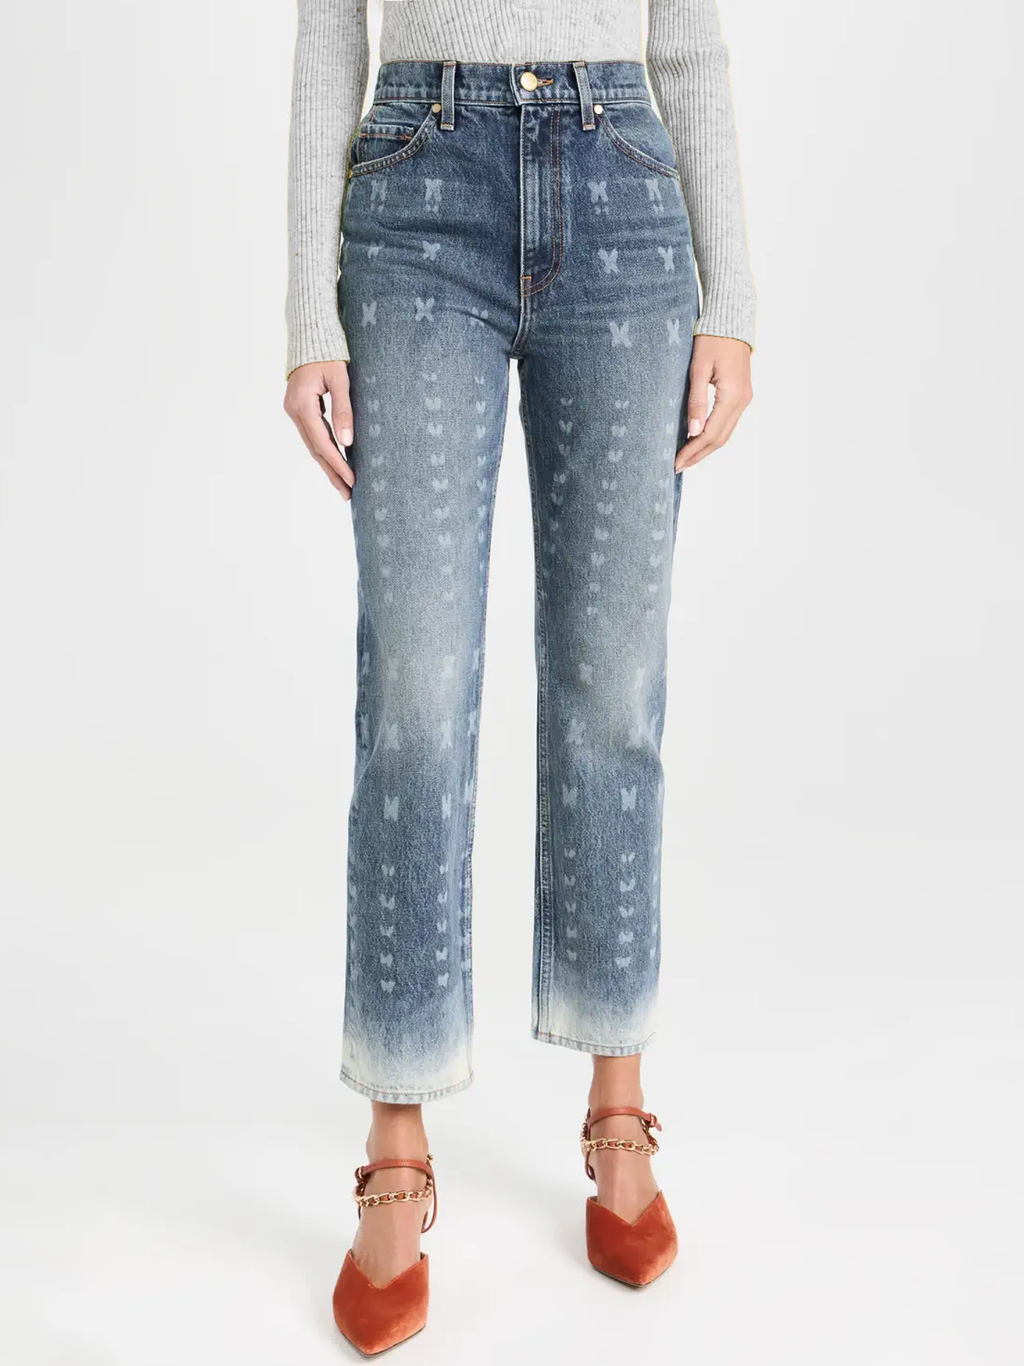 The Cropped Agnes Jeans